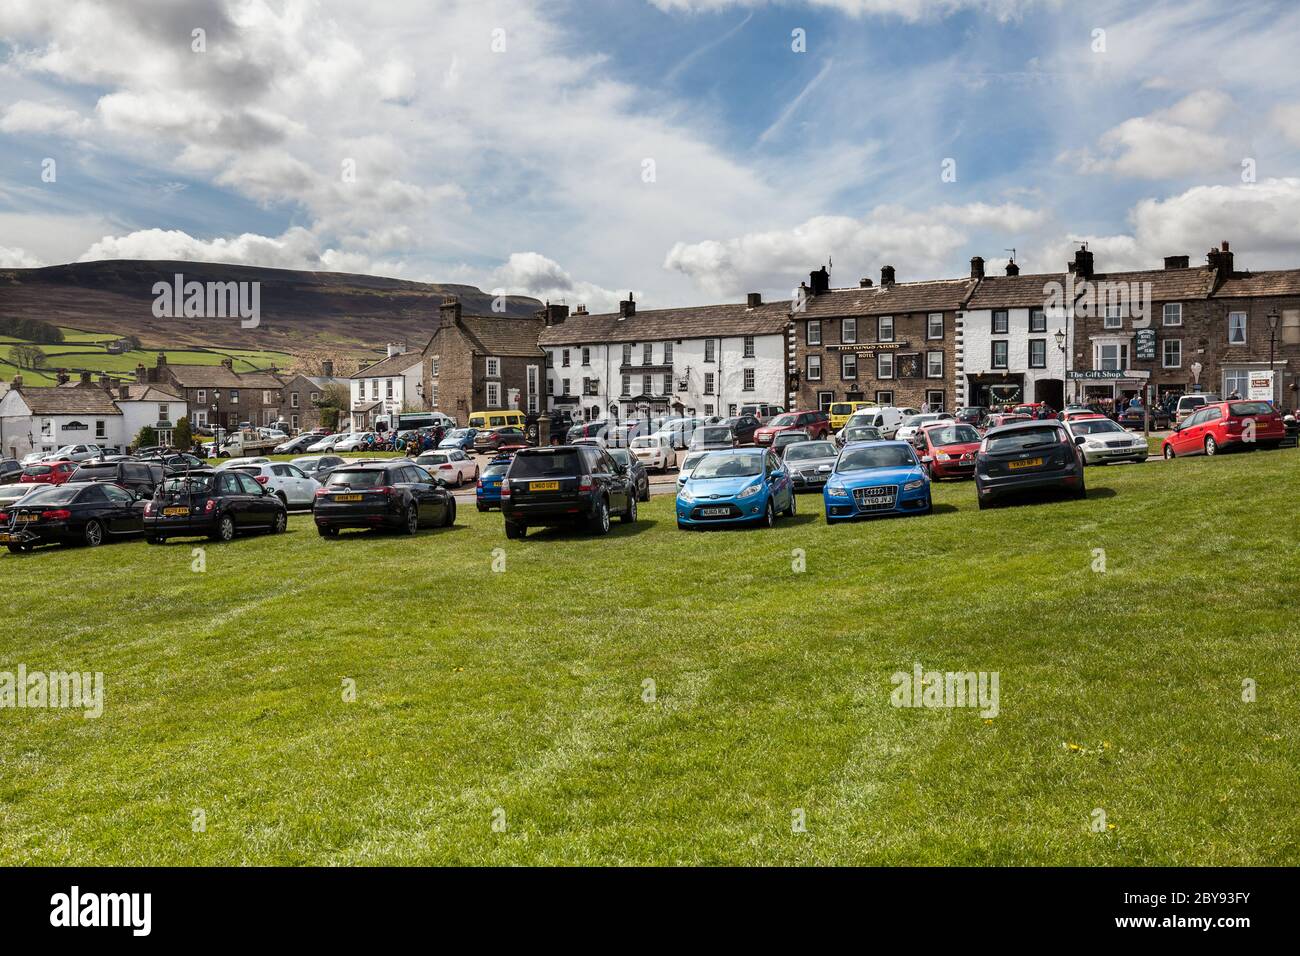 Reeth, Car Parking, Yorkshire Dales, England Stock Photo